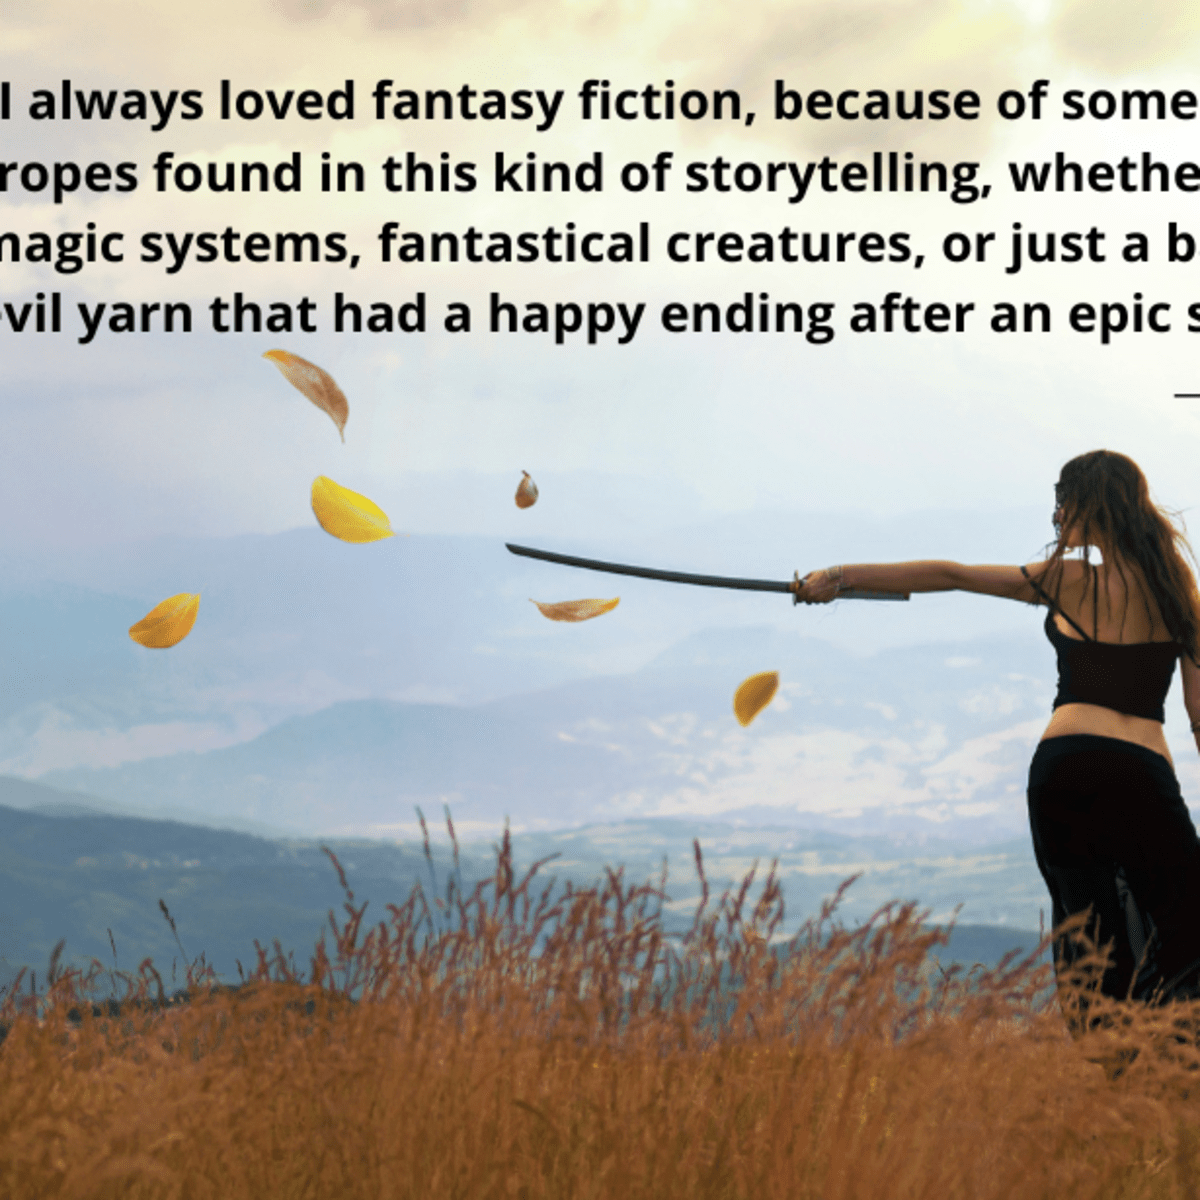 21 Popular Fantasy Tropes for Writers - Writer's Digest